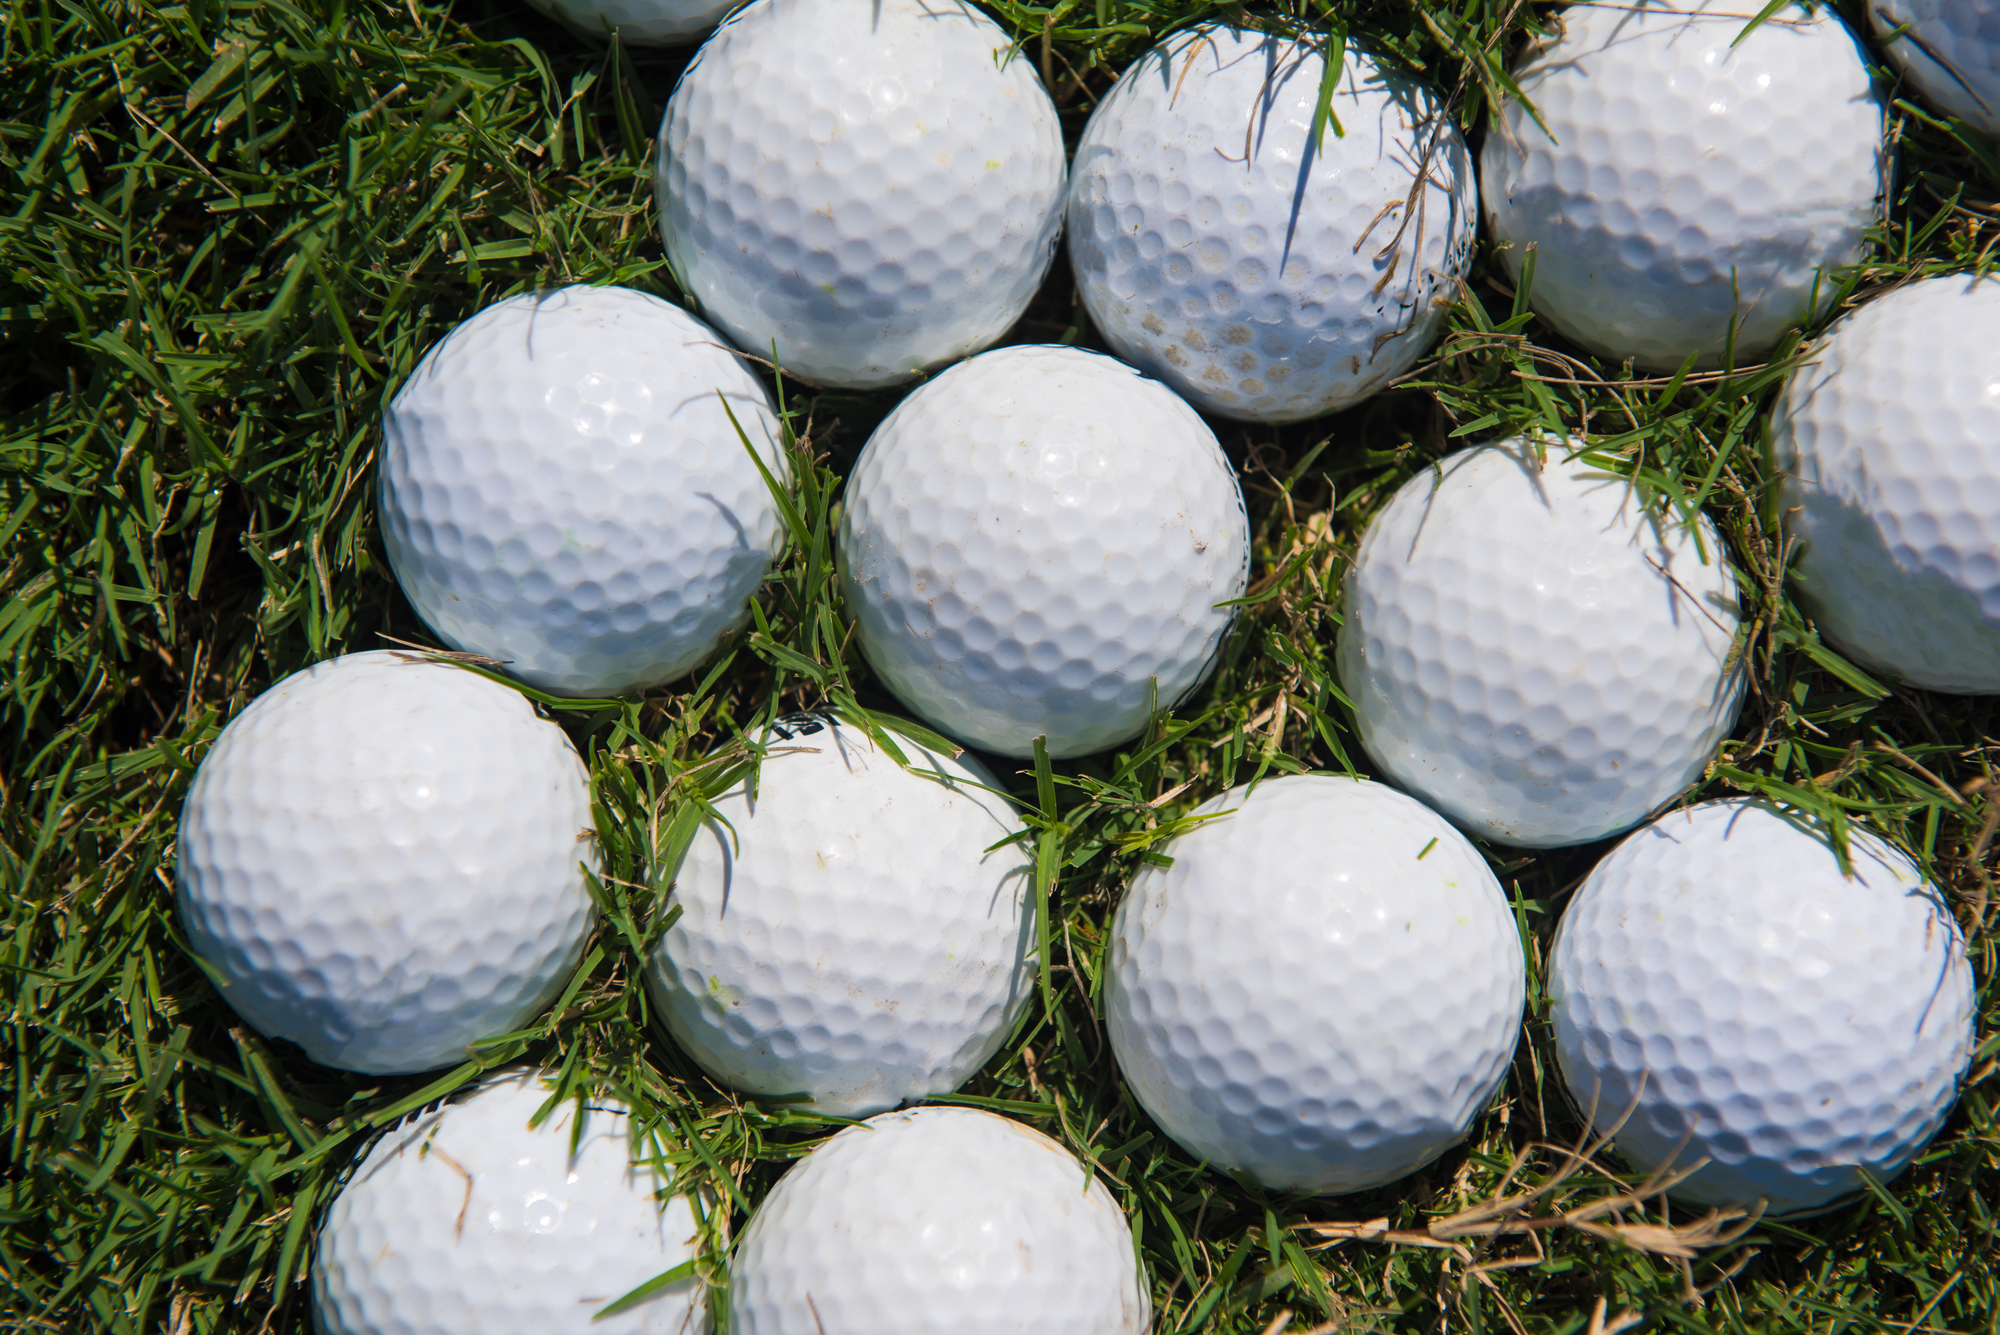 Gear Talk: How to Take Care of Golf Balls